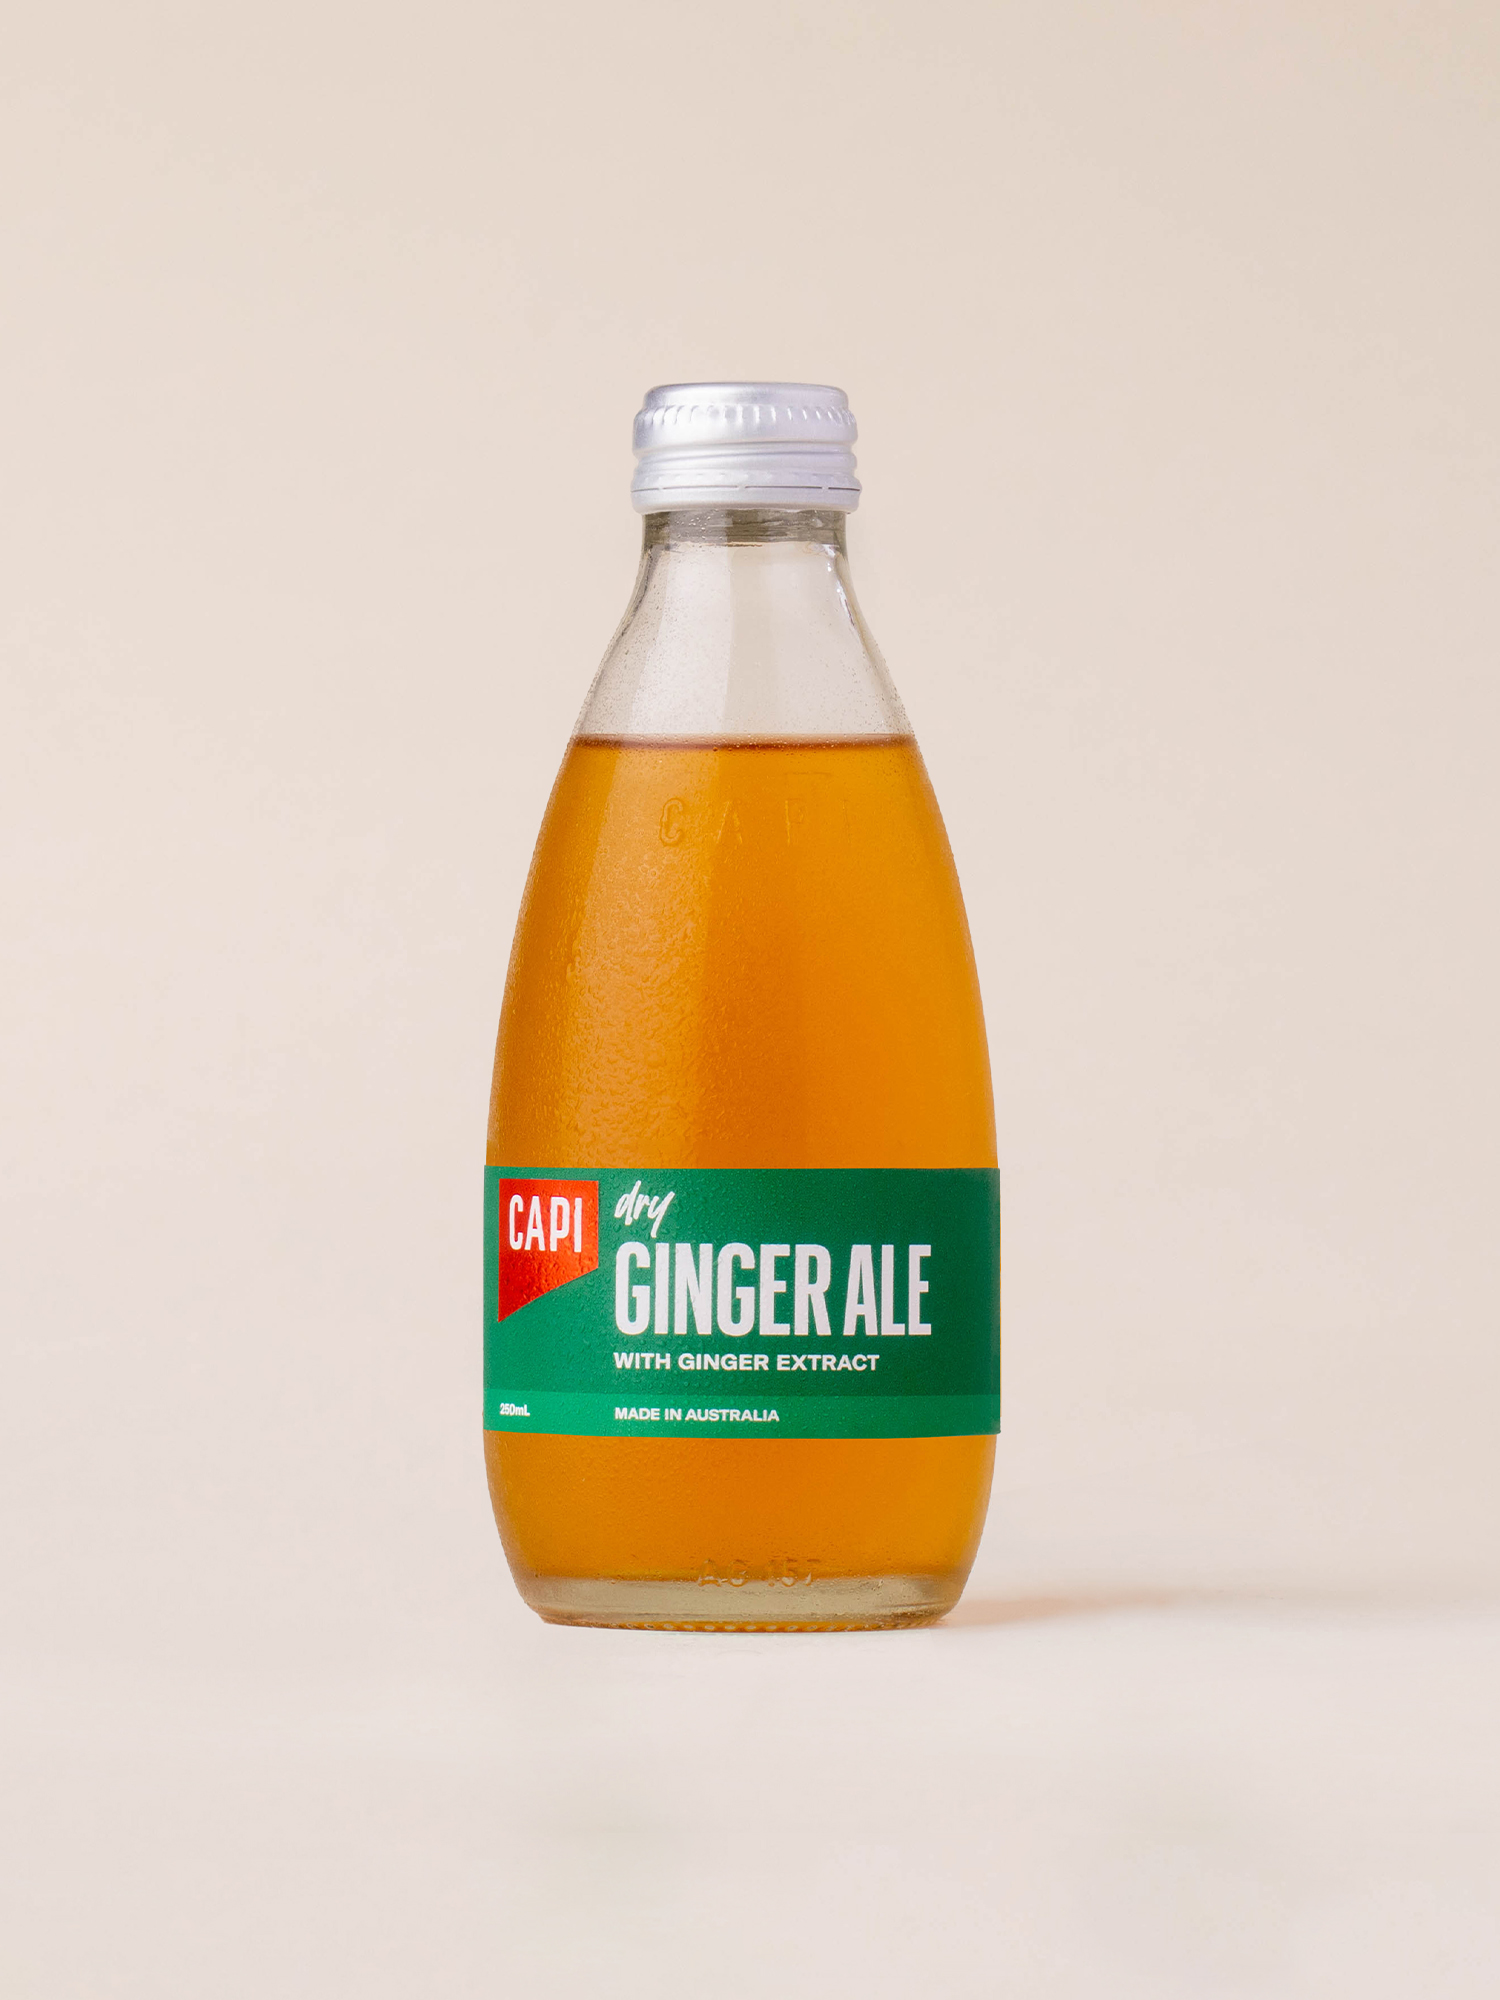 Dry Ginger ale 250ml